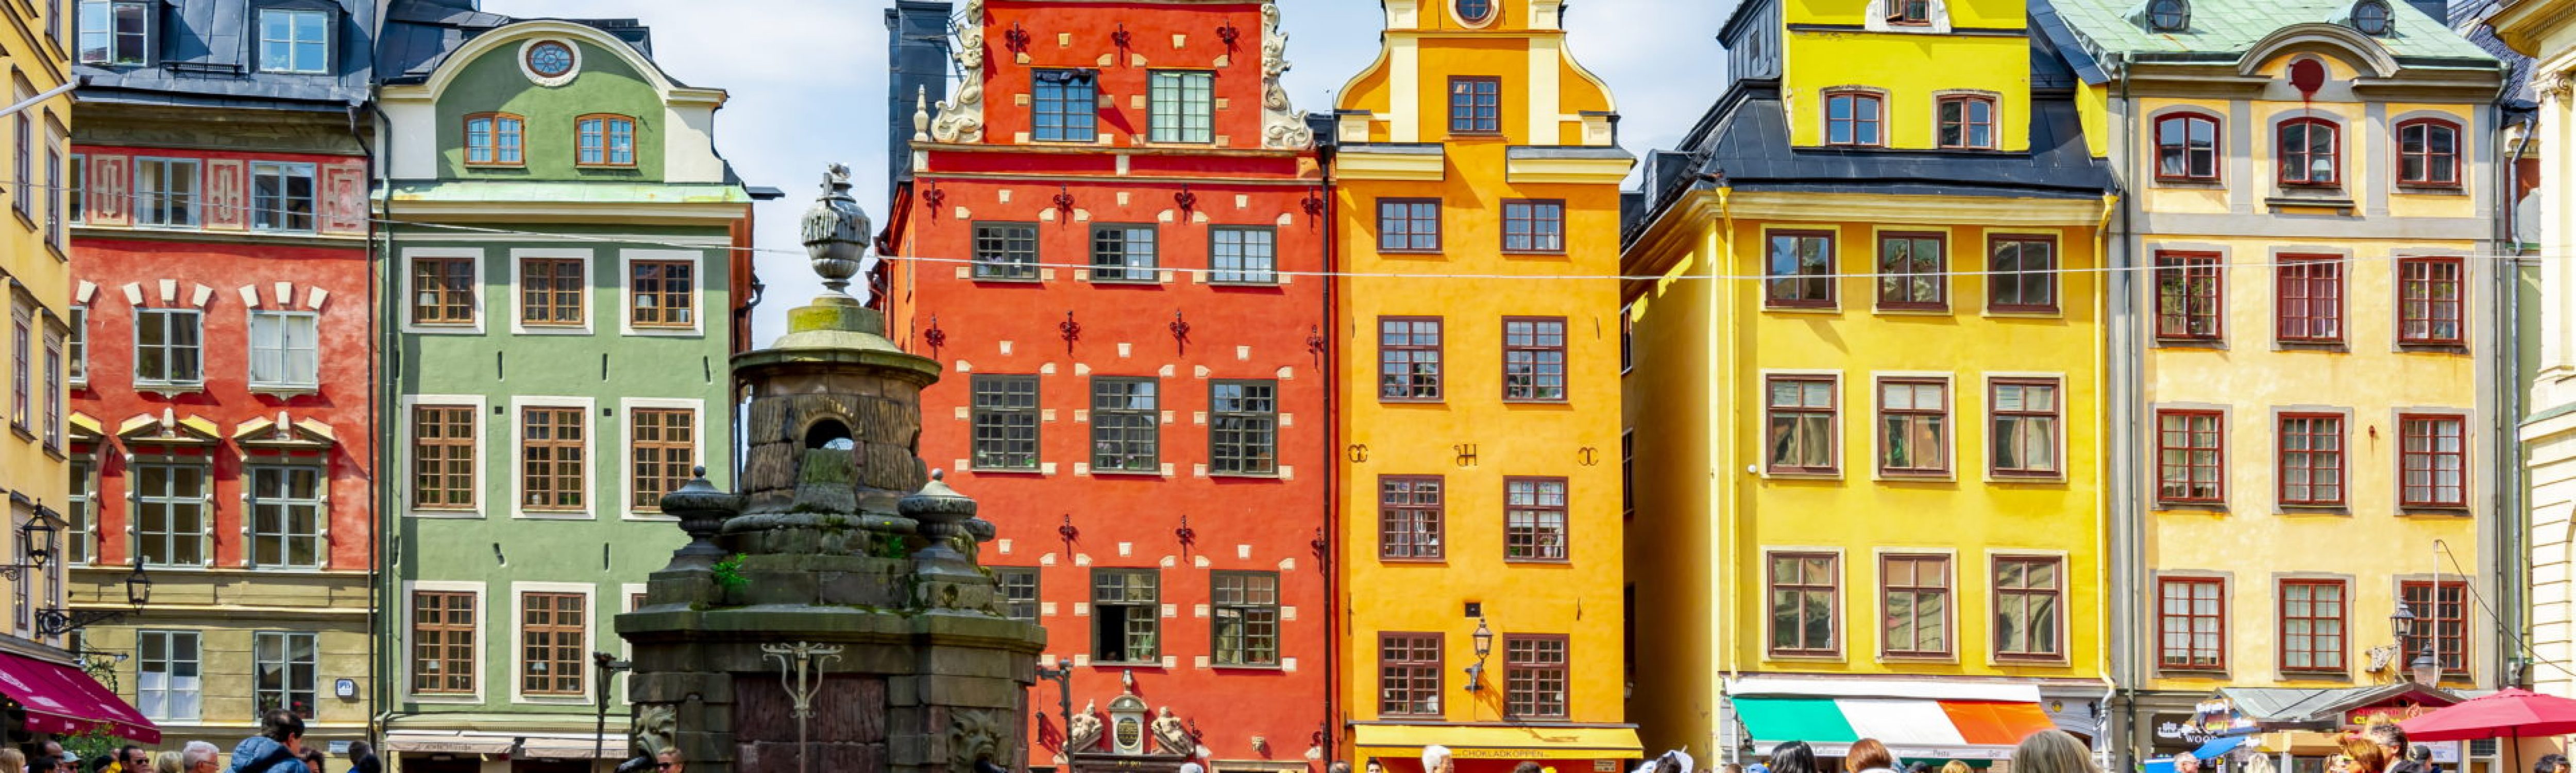 European Capacity Building Workshop Series. A colorful houses on Stortorget square in Old town, Stockholm, Sweden